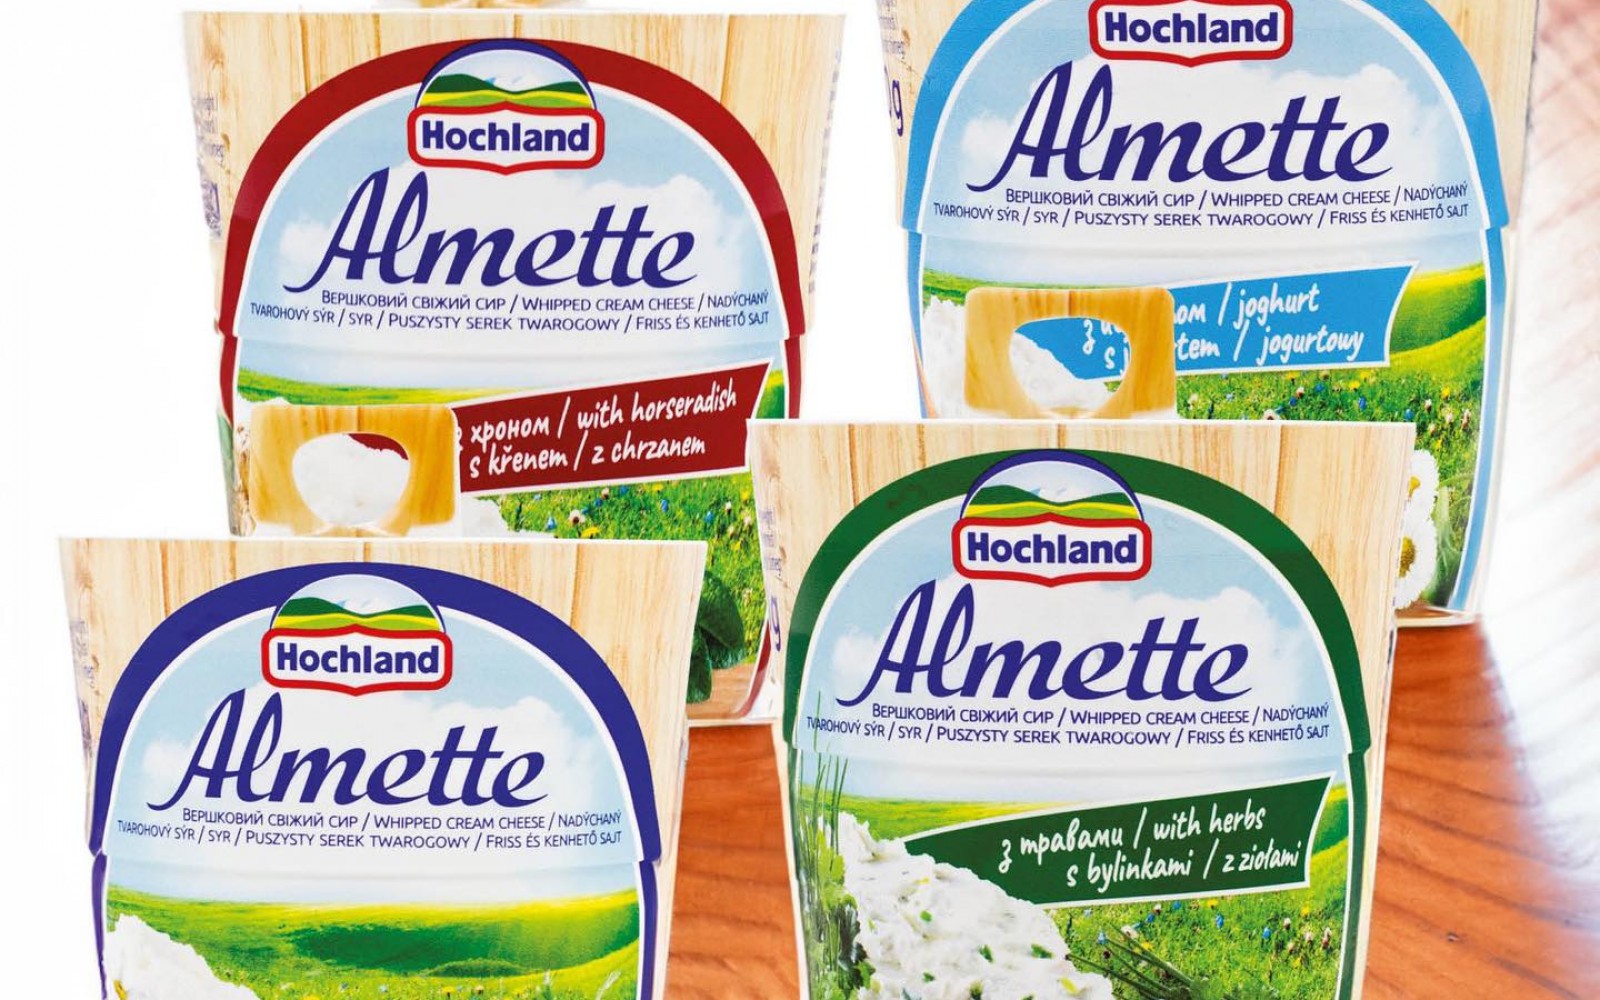 If you are looking for the creamiest, easy to spread, divinely delicious cream cheese